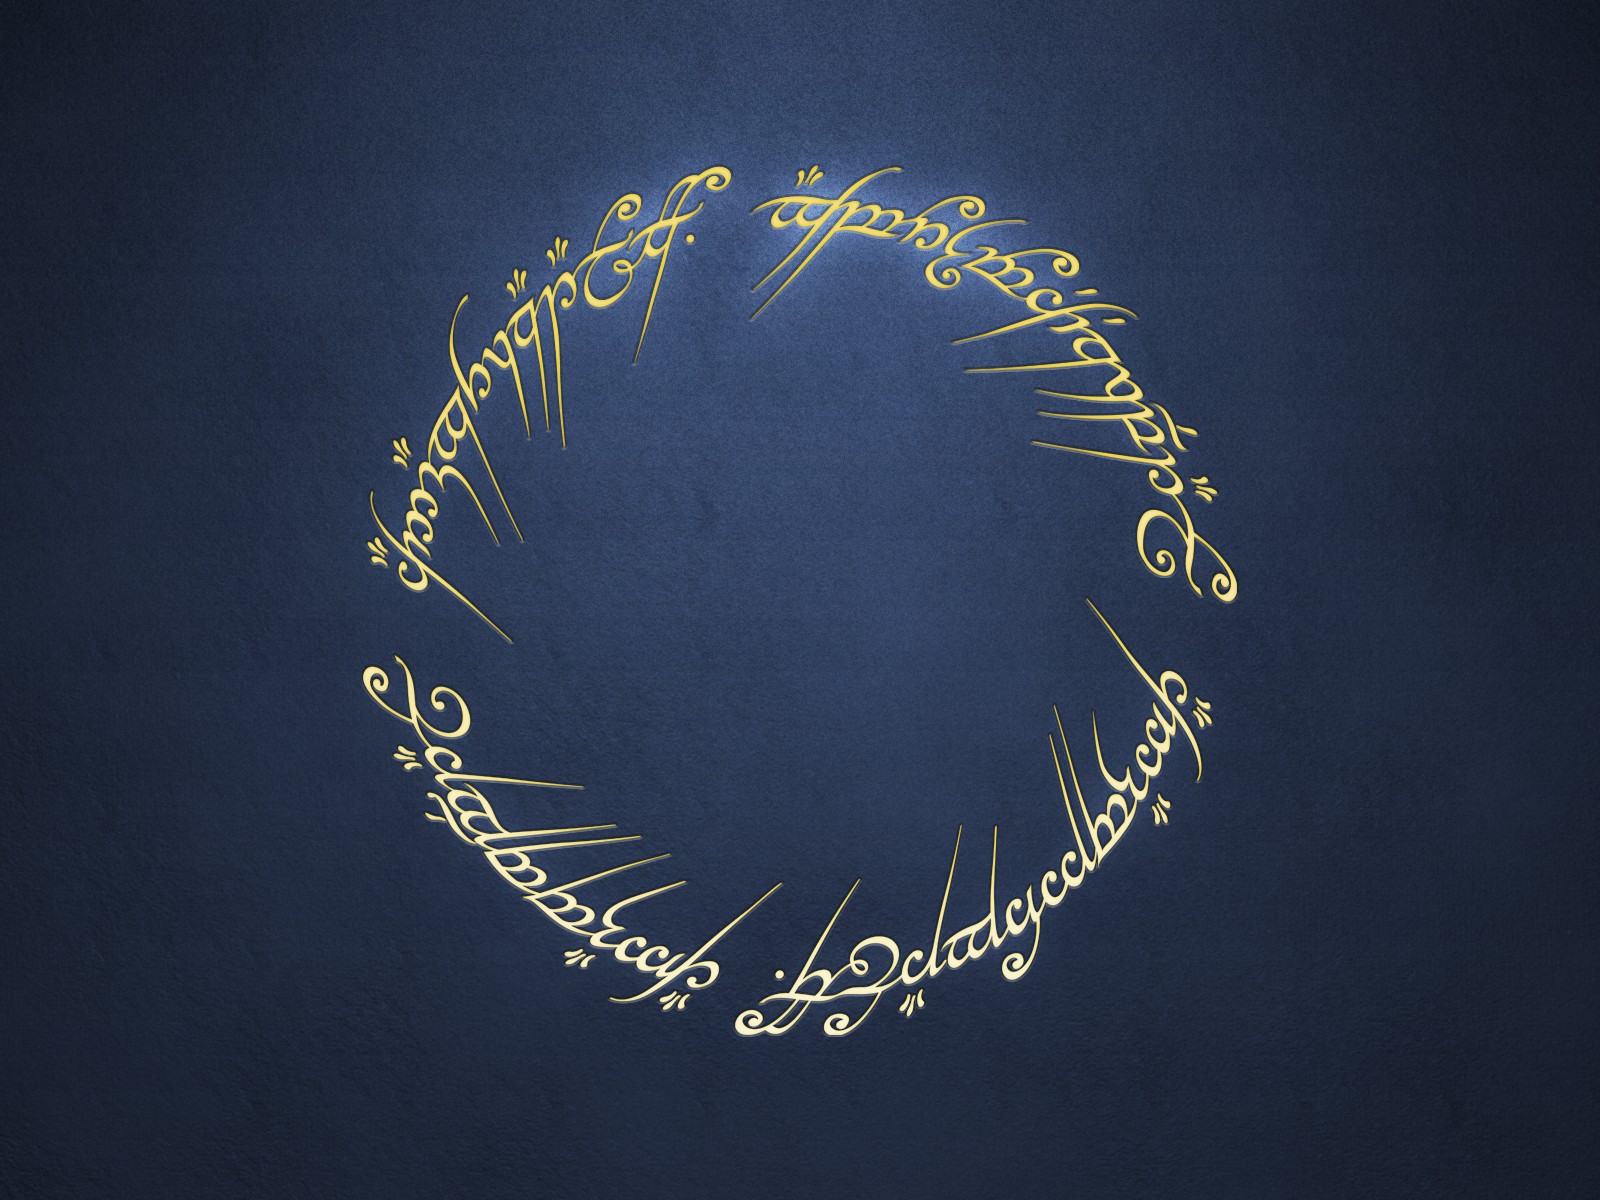 General 1600x1200 The Lord of the Rings movies blue background